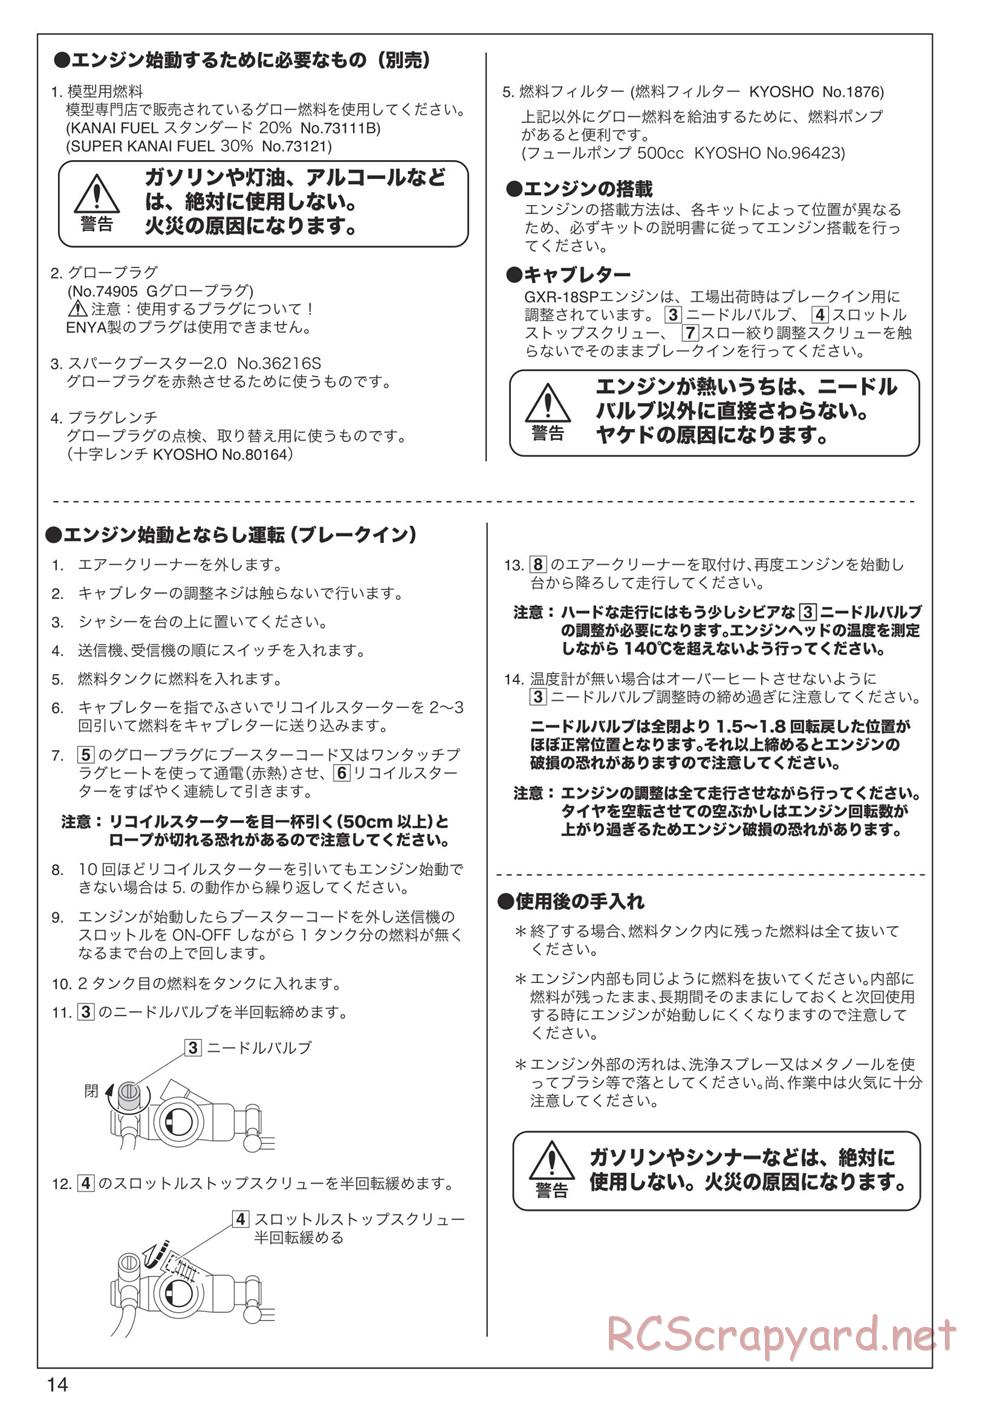 Kyosho - DMT - Manual - Page 14